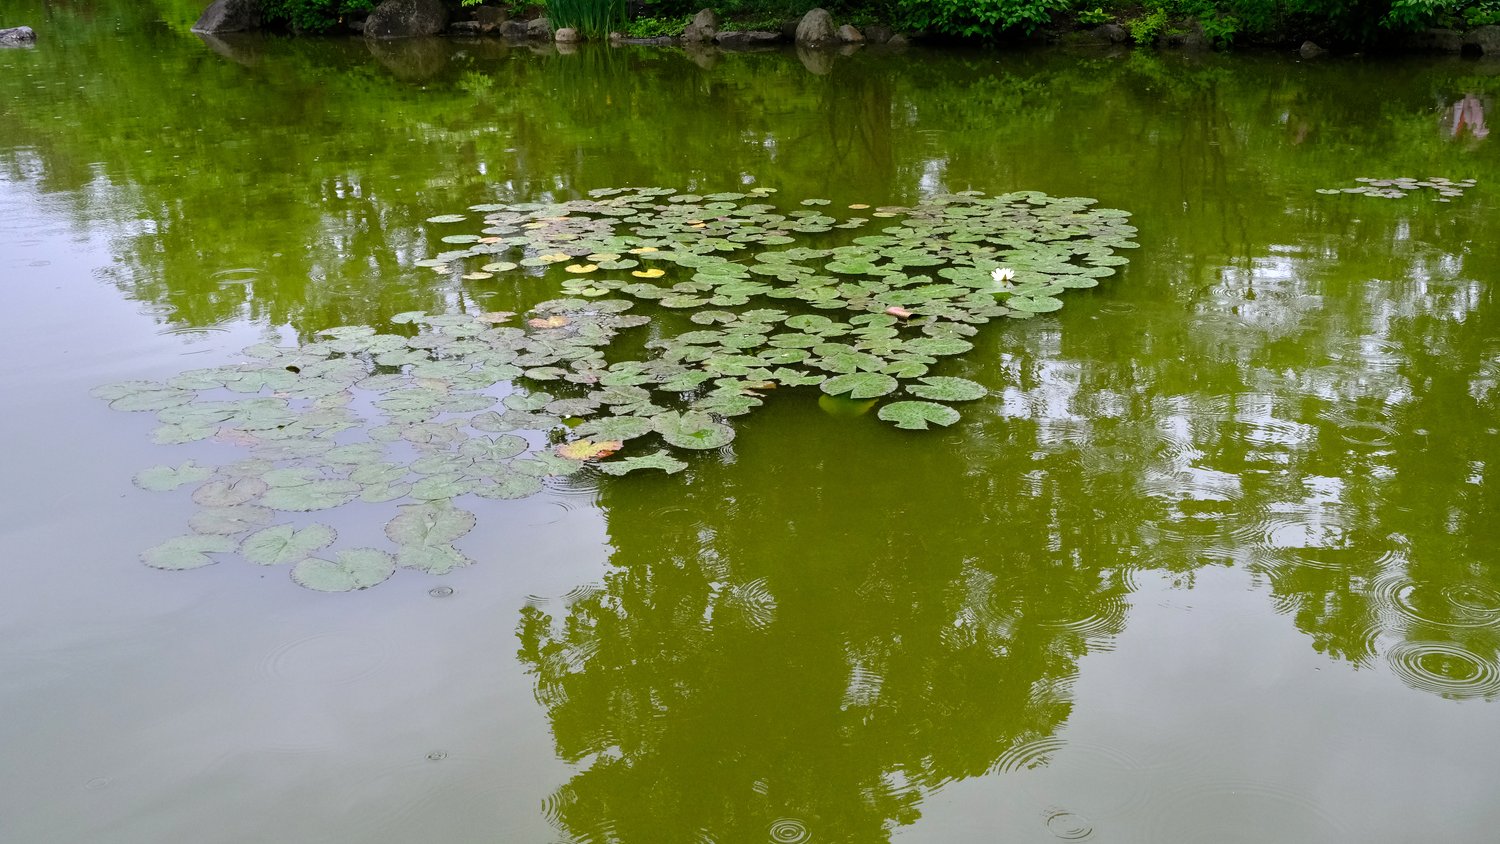 Lilly pads in the Garden of Reflection pond.